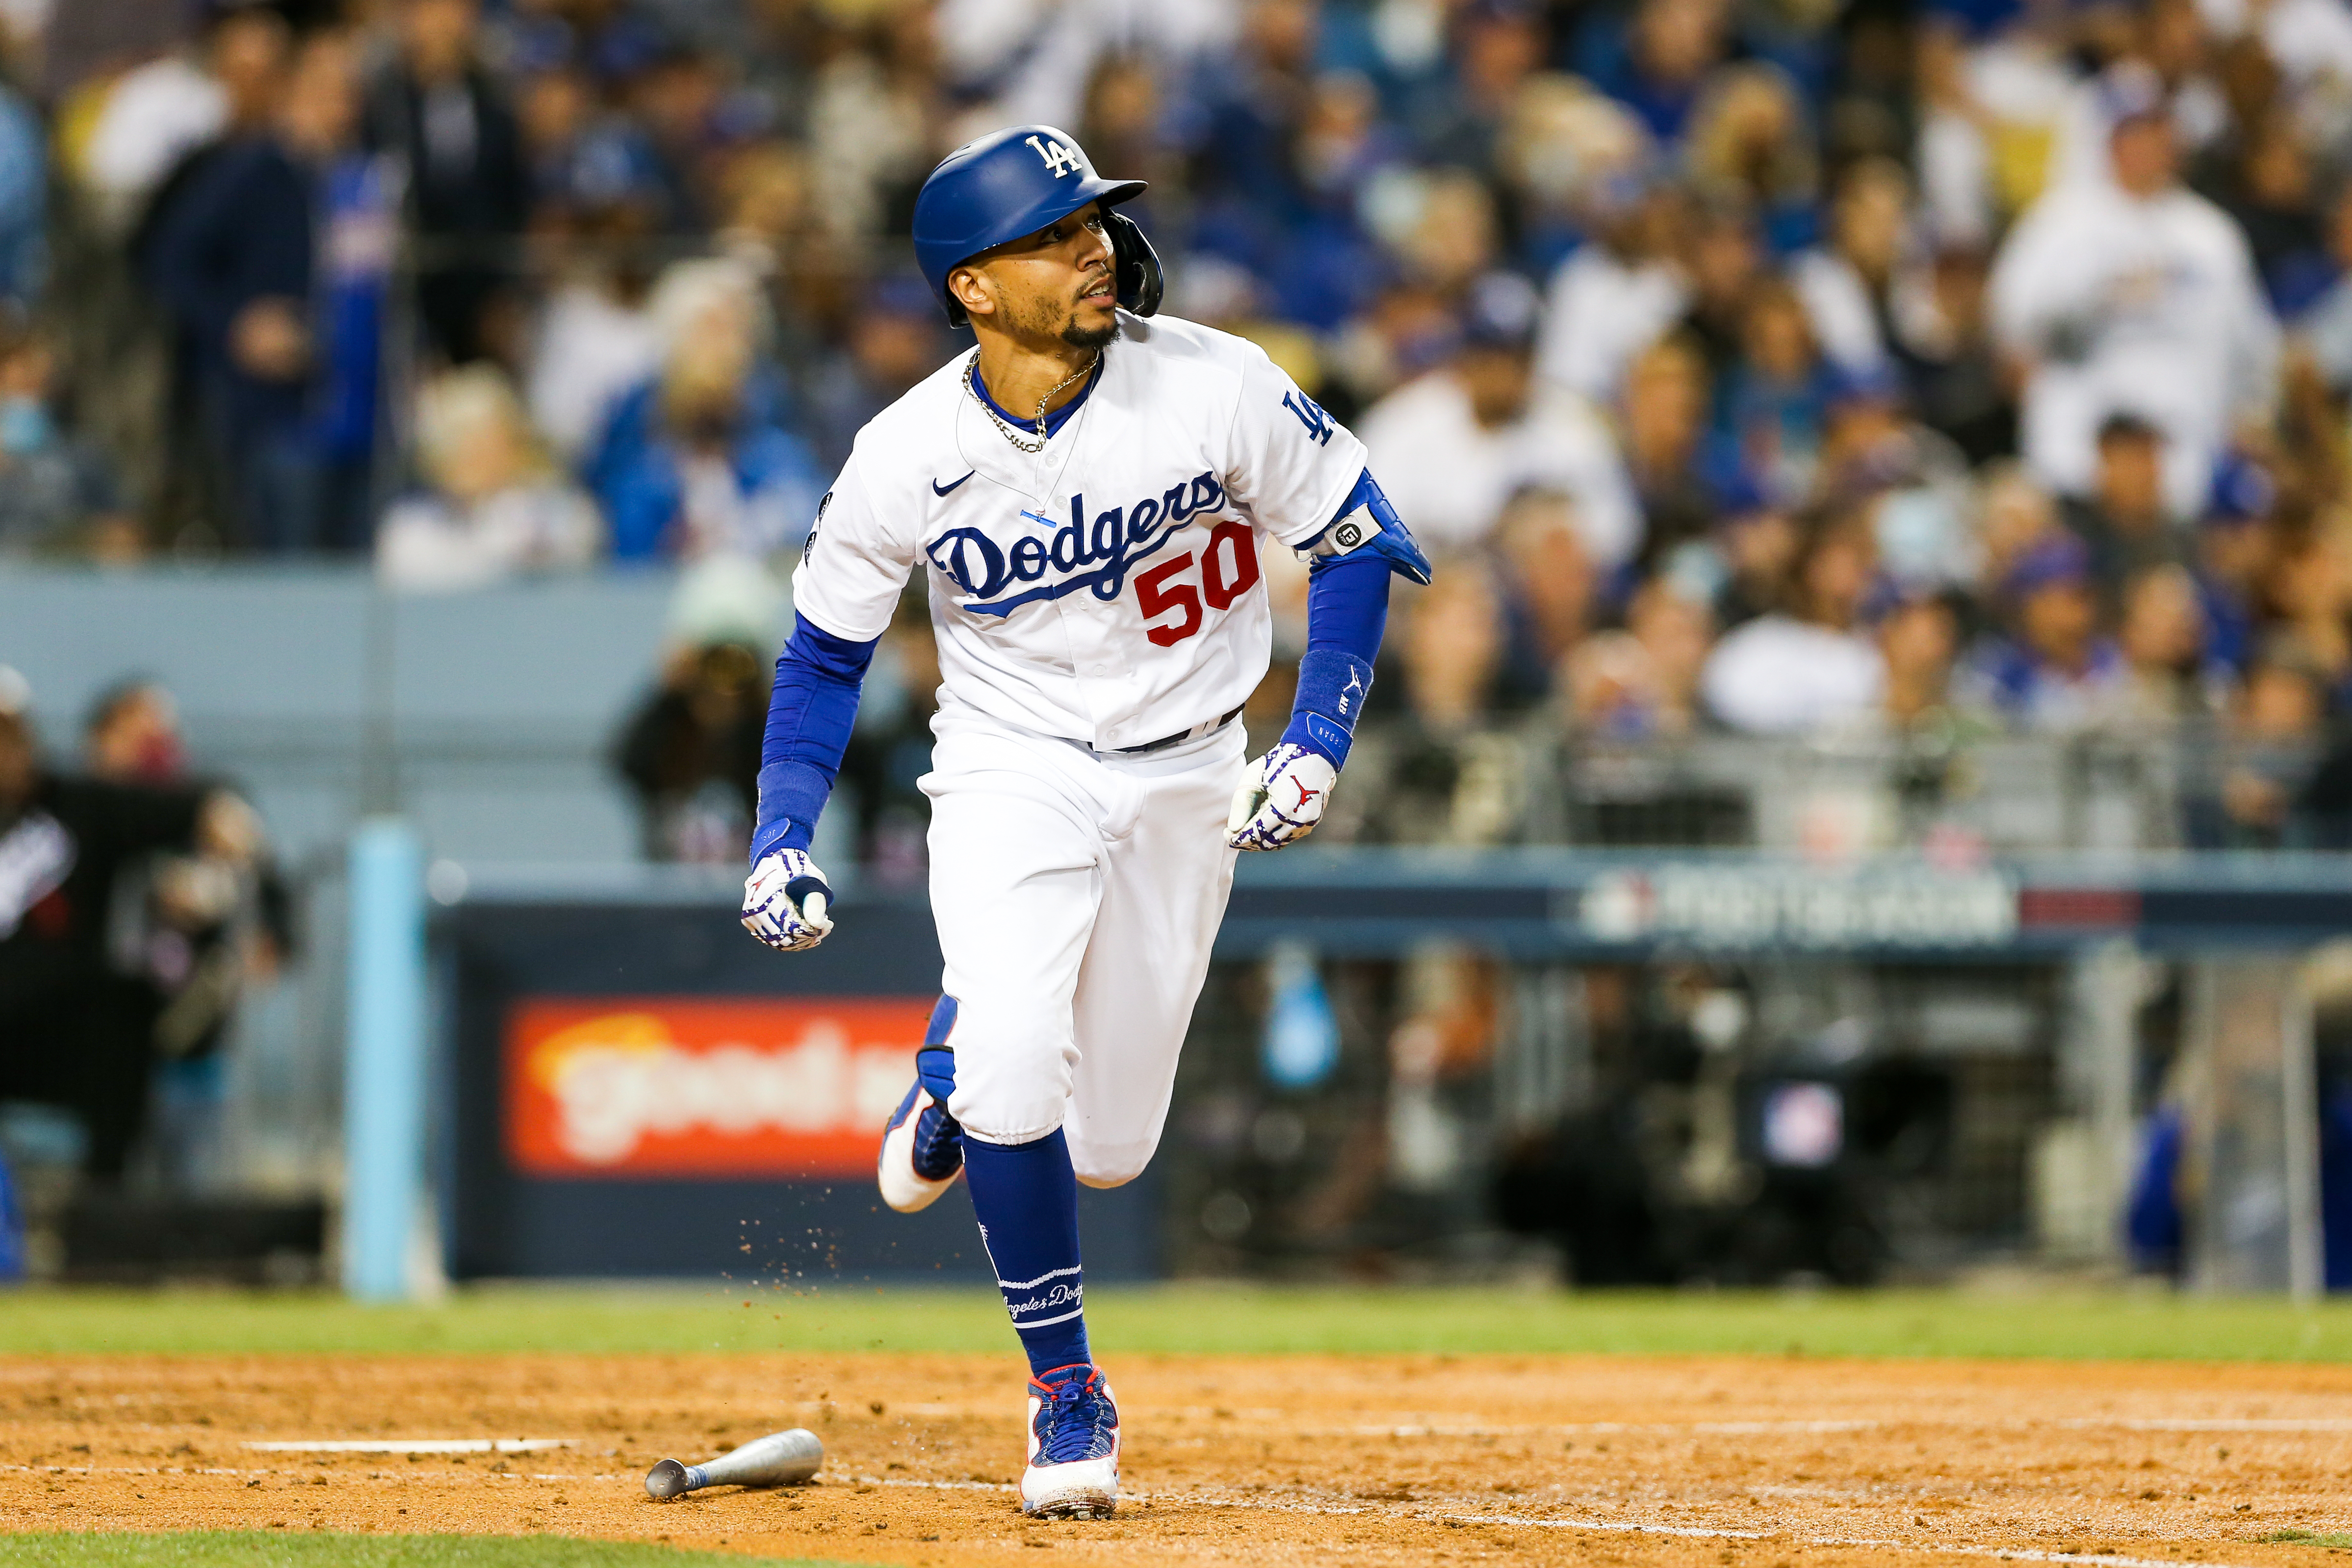 Betts hits 200th career HR as Dodgers defeat Giants 4-2